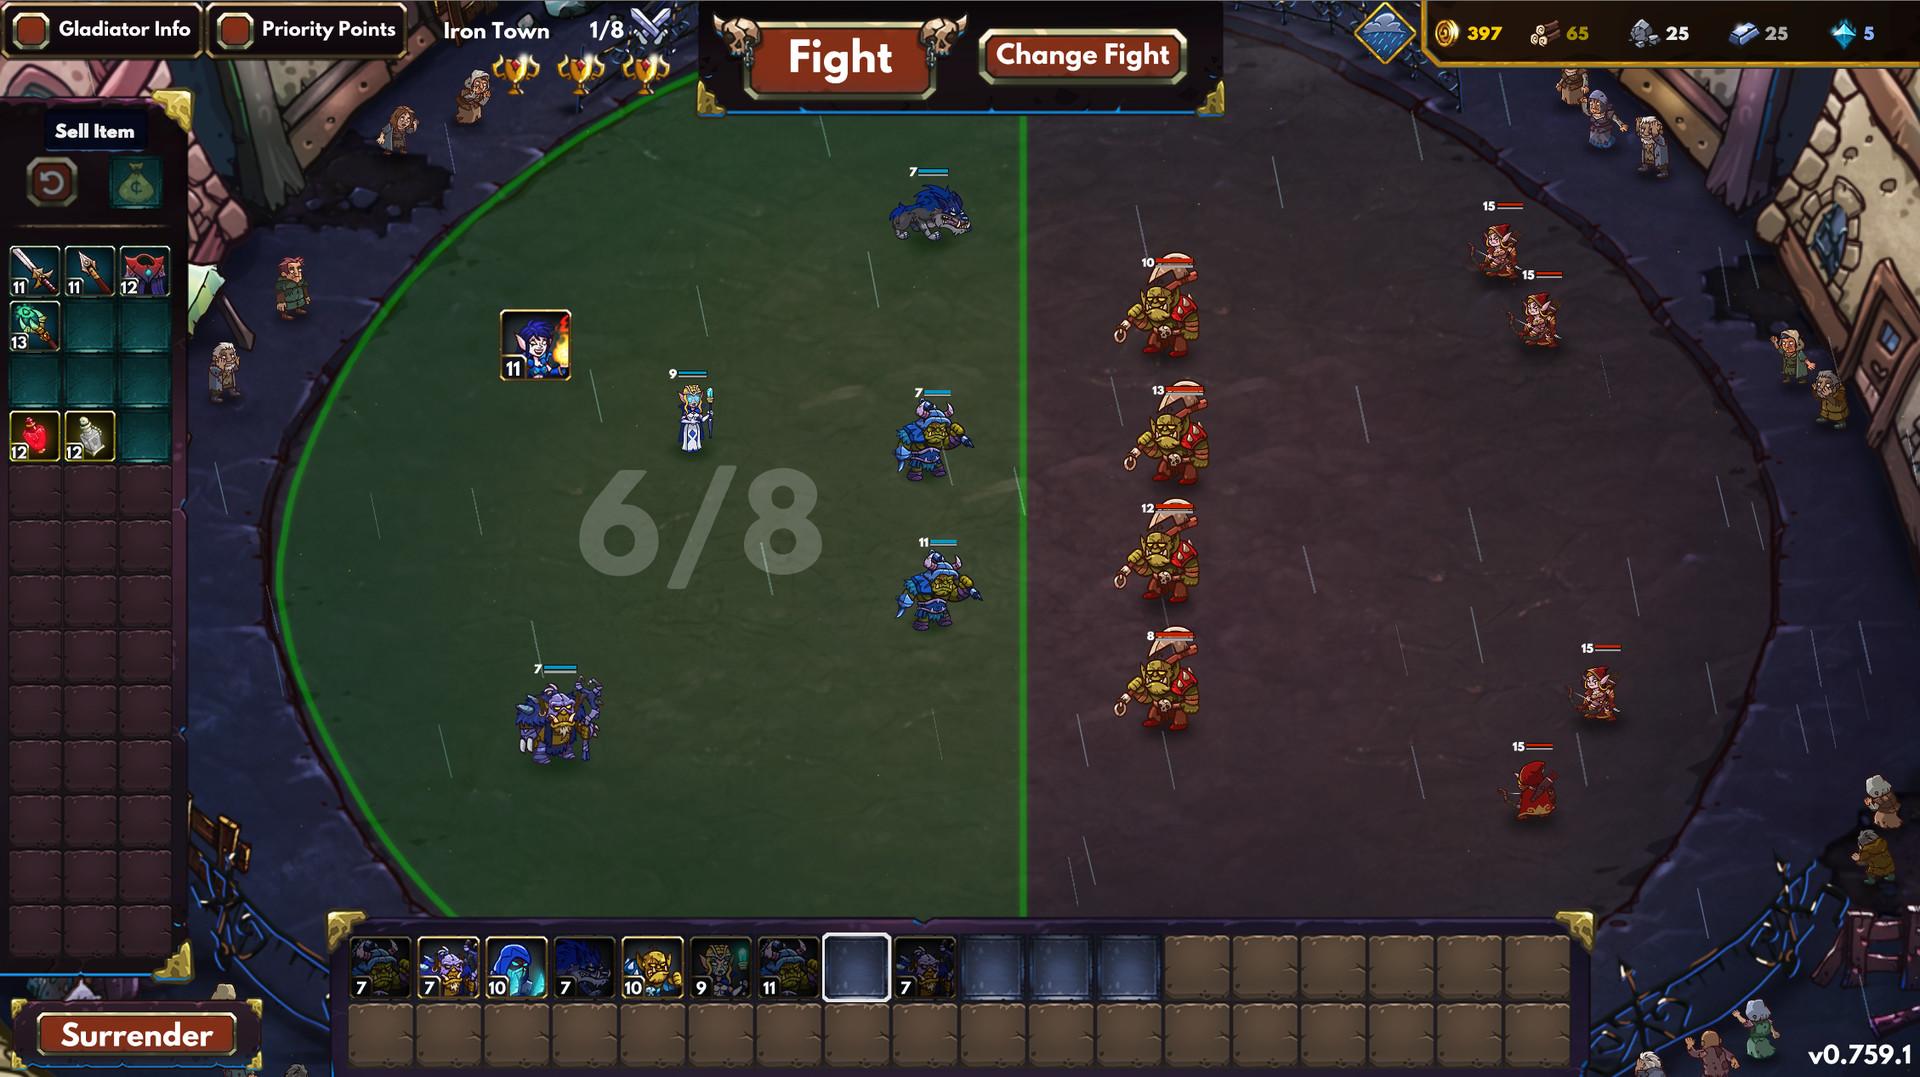 Screenshot №7 from game Gladiator Guild Manager